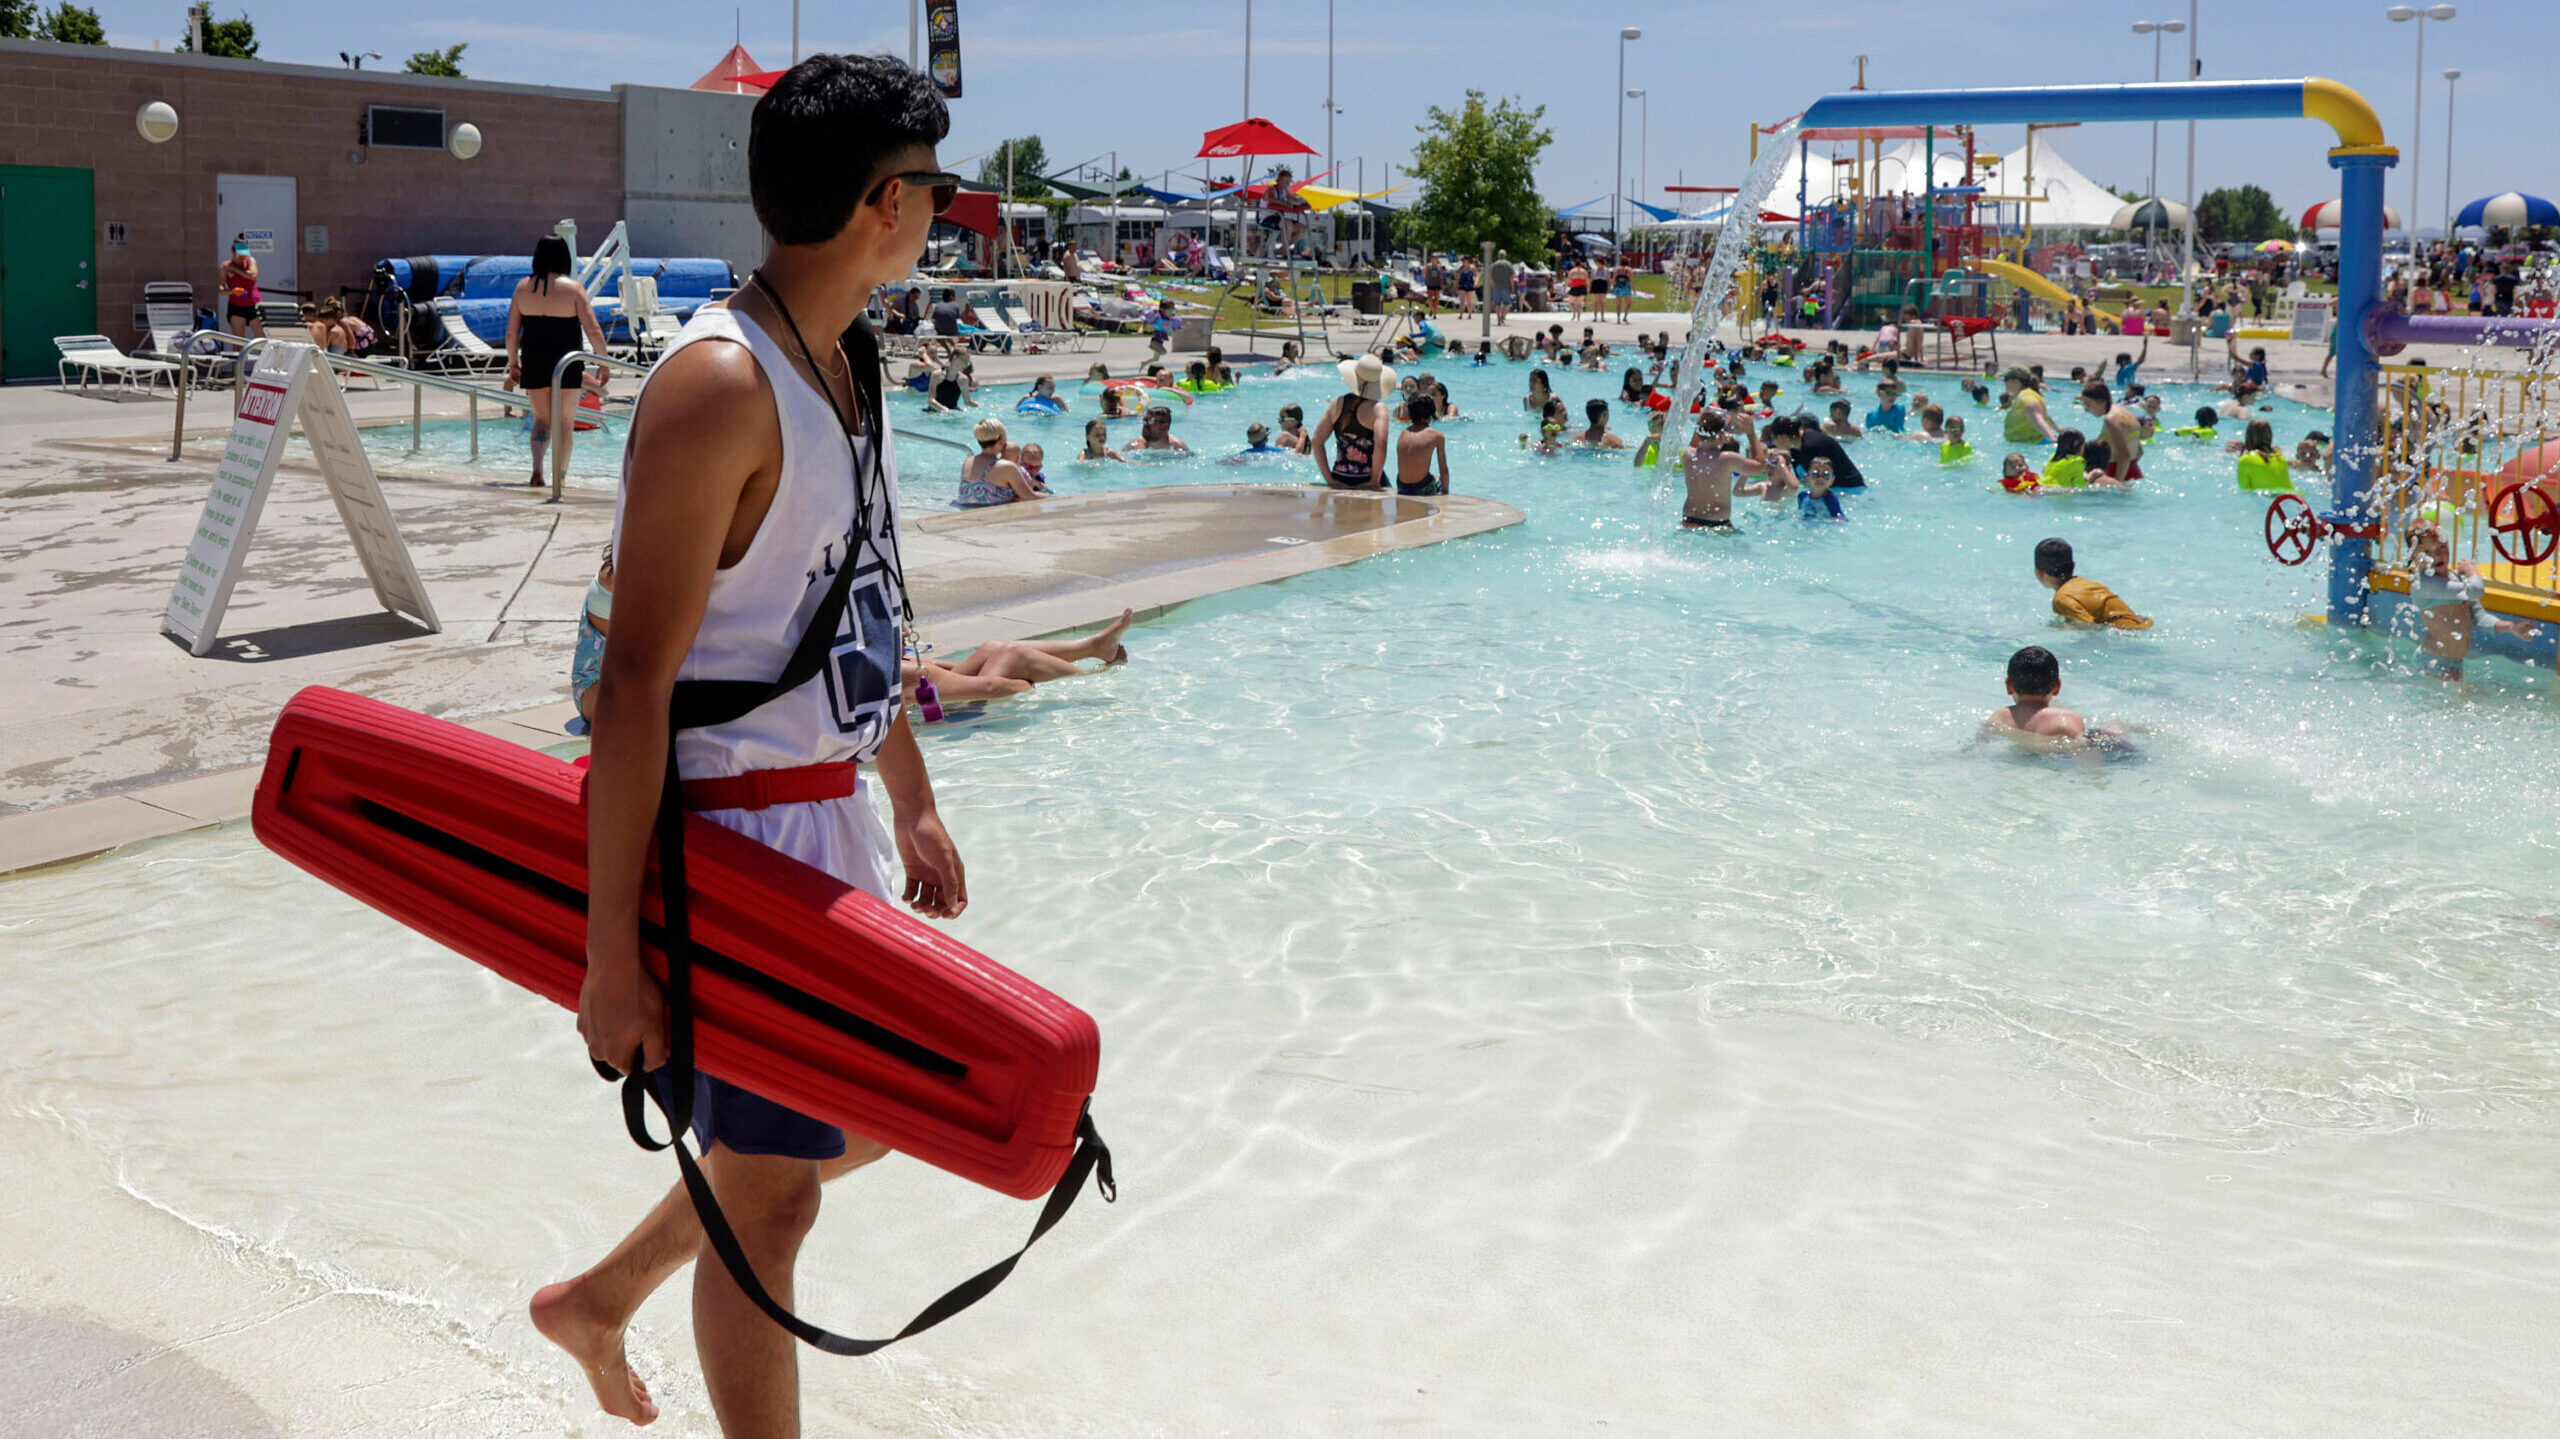 FILE: A lifeguard at the Kearns Oquirrh Park Fitness Center watches swimmers at the pool in Kearns ...